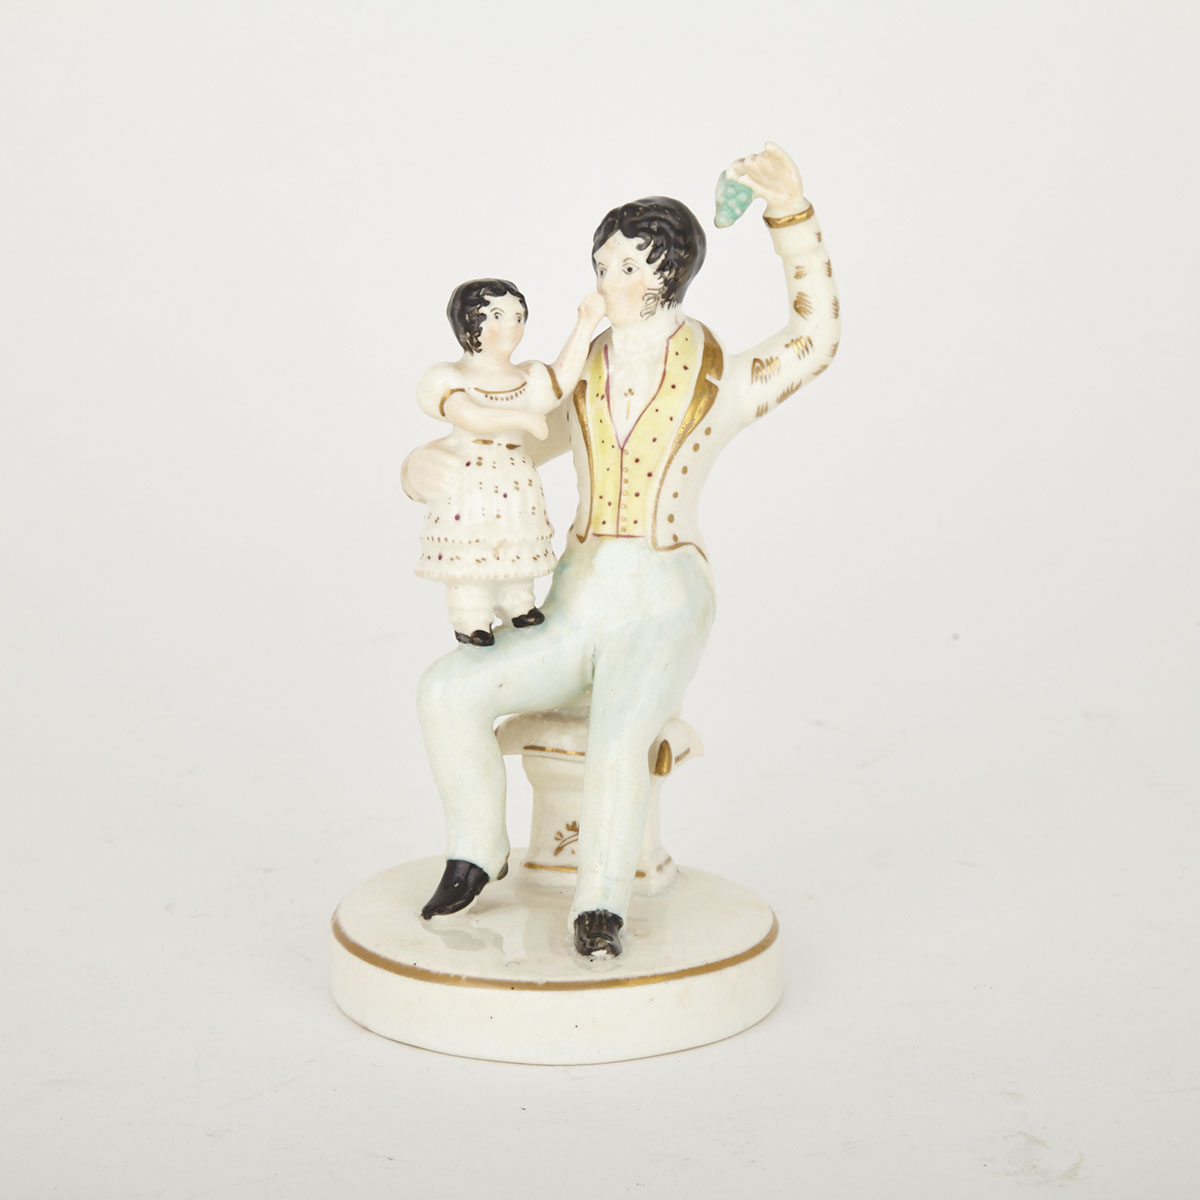 Staffordshire Porcelain Figure of a Father and Child, c.1840